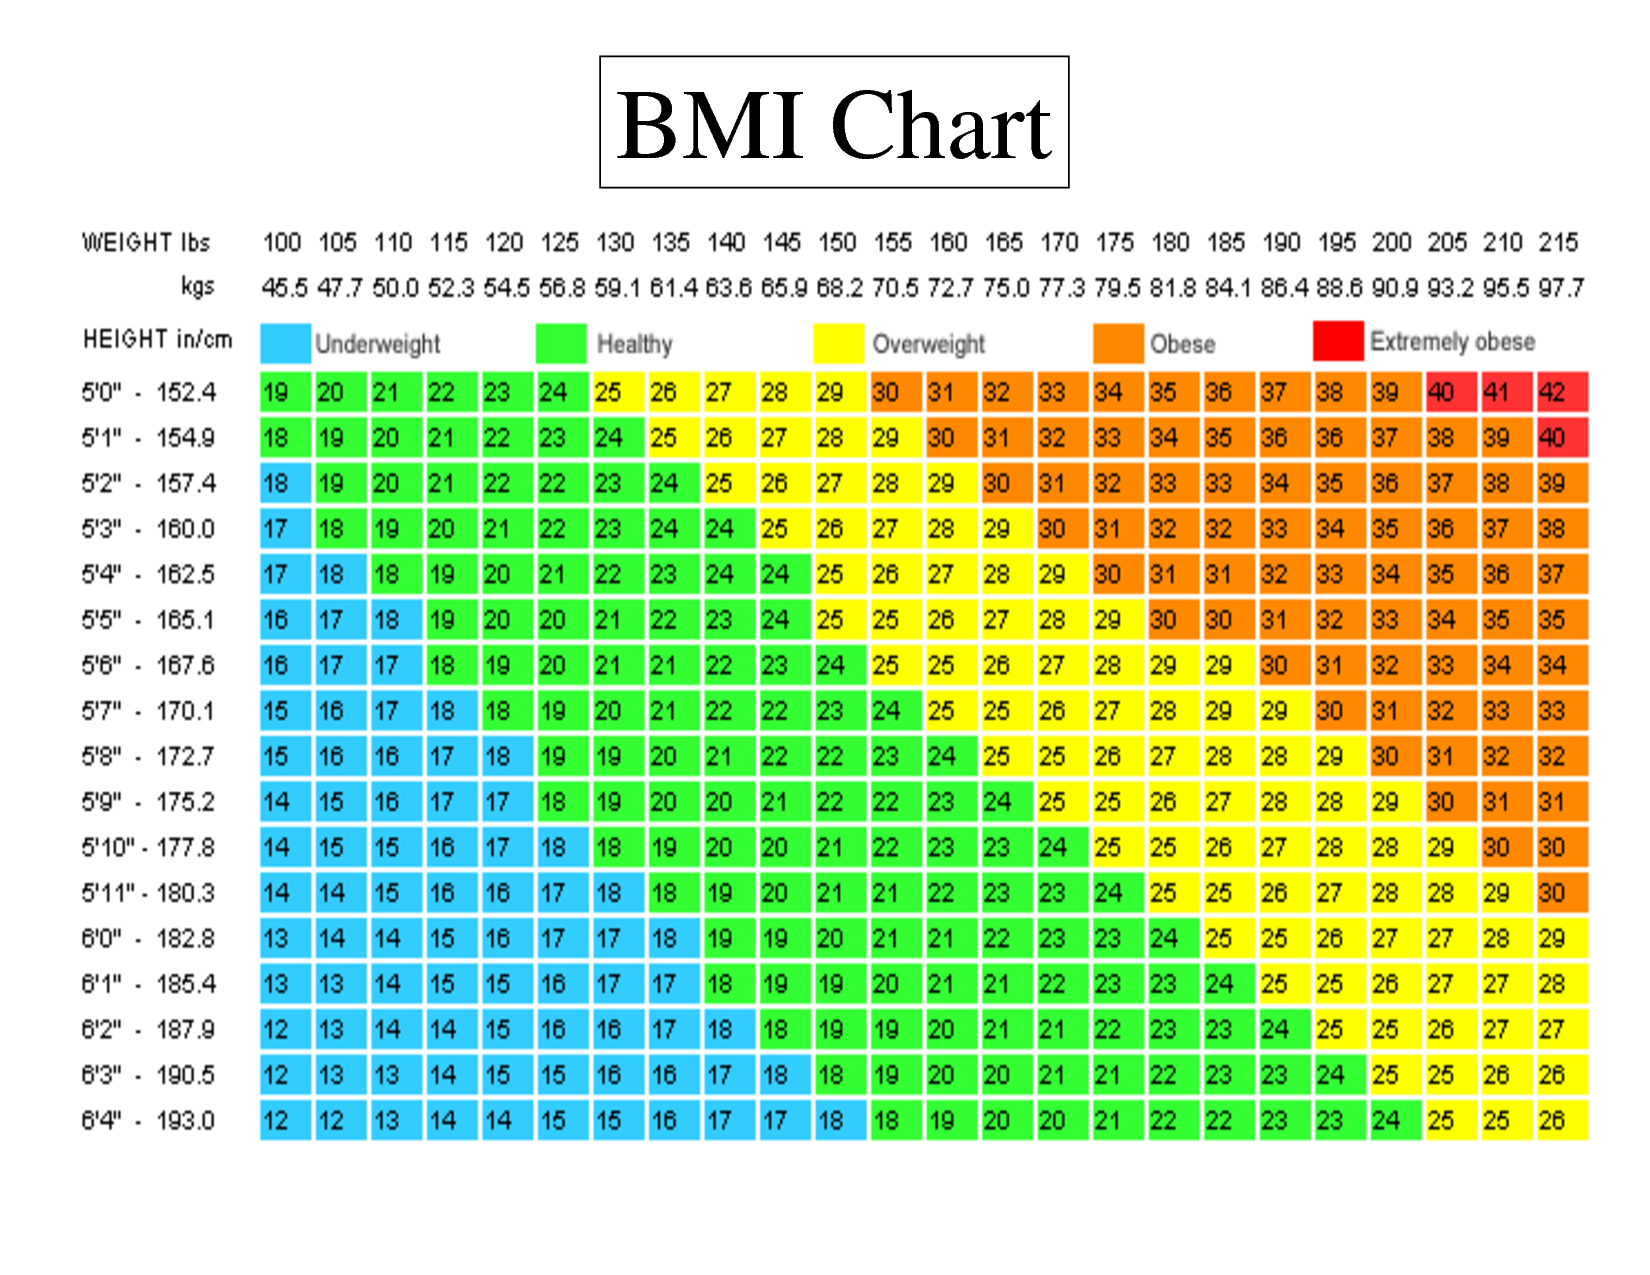 Another Study Shows BMI, Biometric Screenings Lack Efficacy